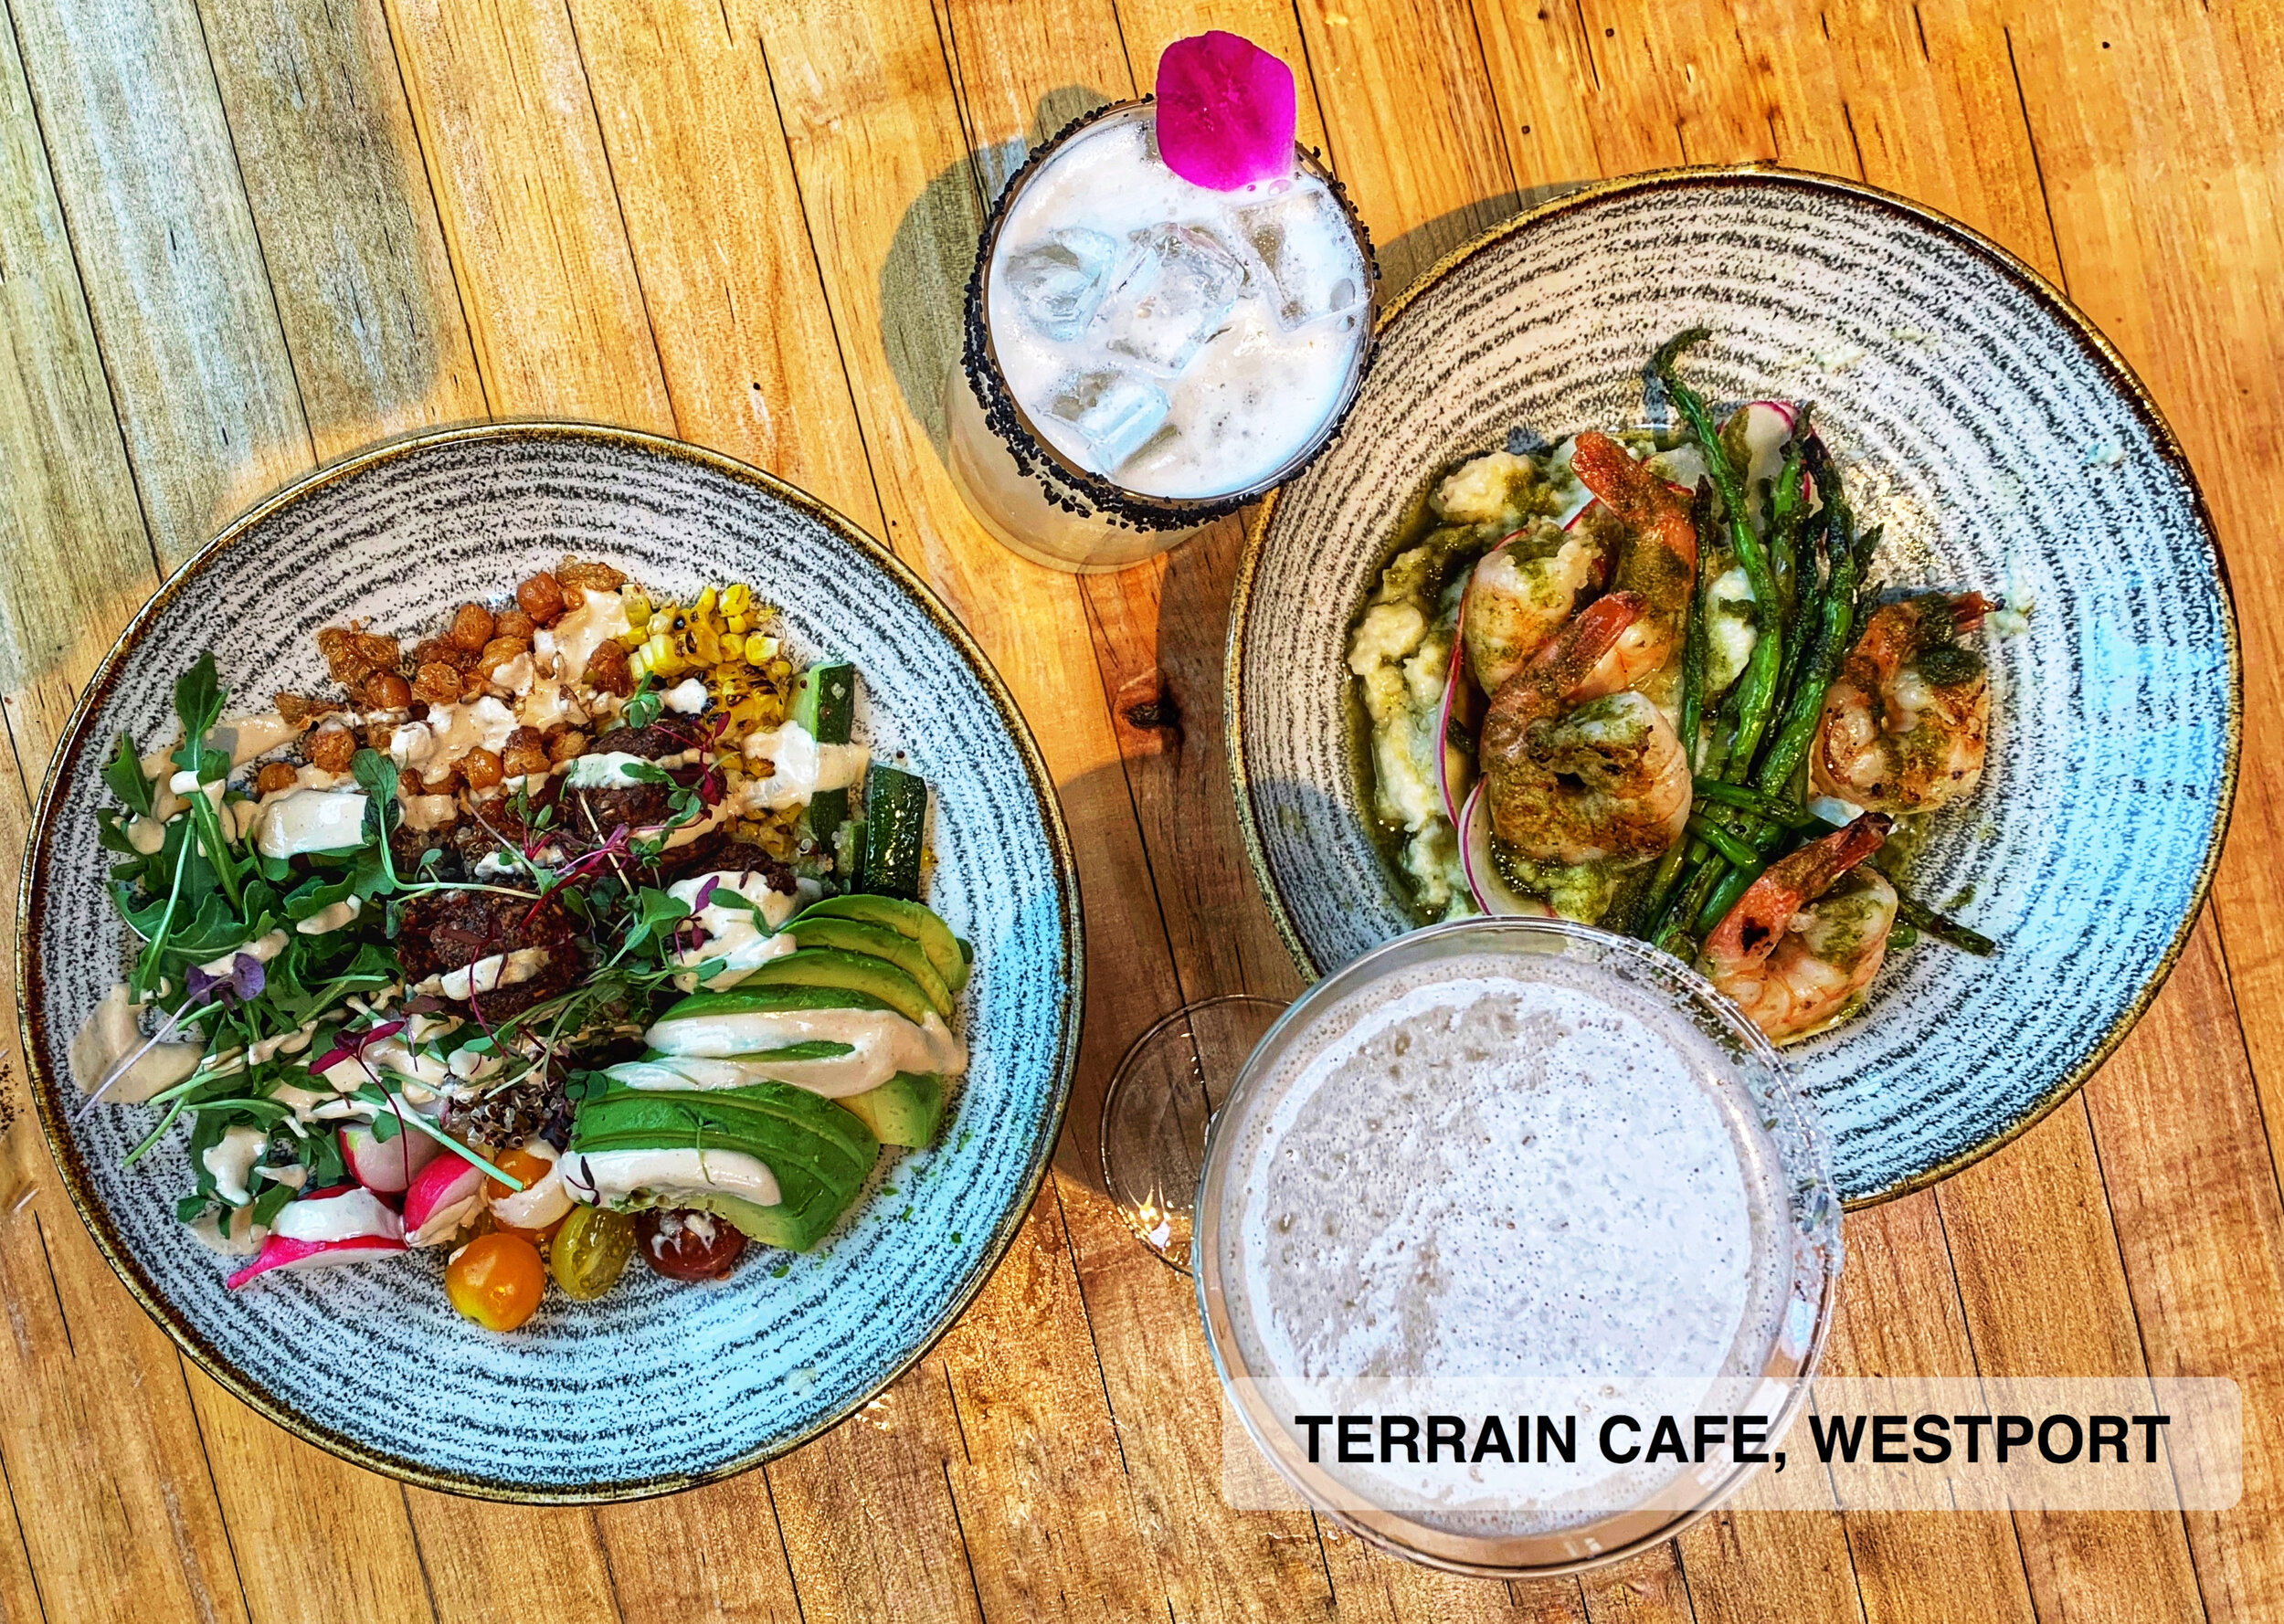 Terrain Cafe Updated Front Image.JPG